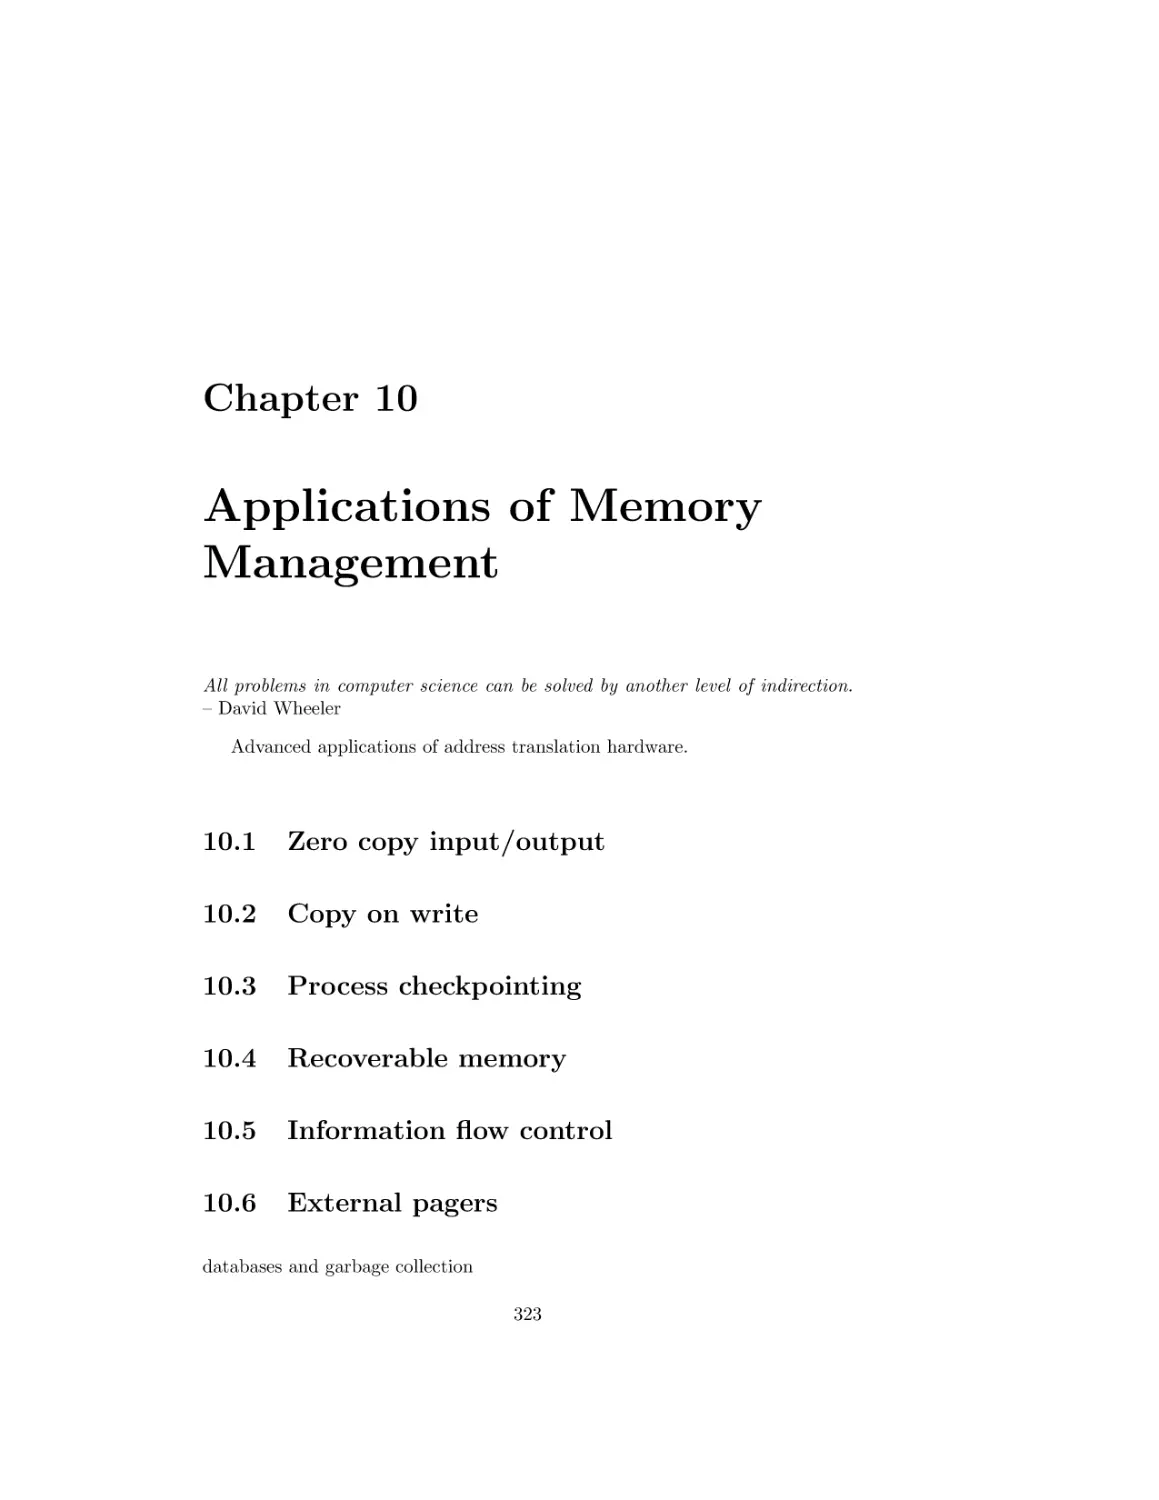 Applications of Memory Management
Zero copy input/output
Copy on write
Process checkpointing
Recoverable memory
Information flow control
External pagers